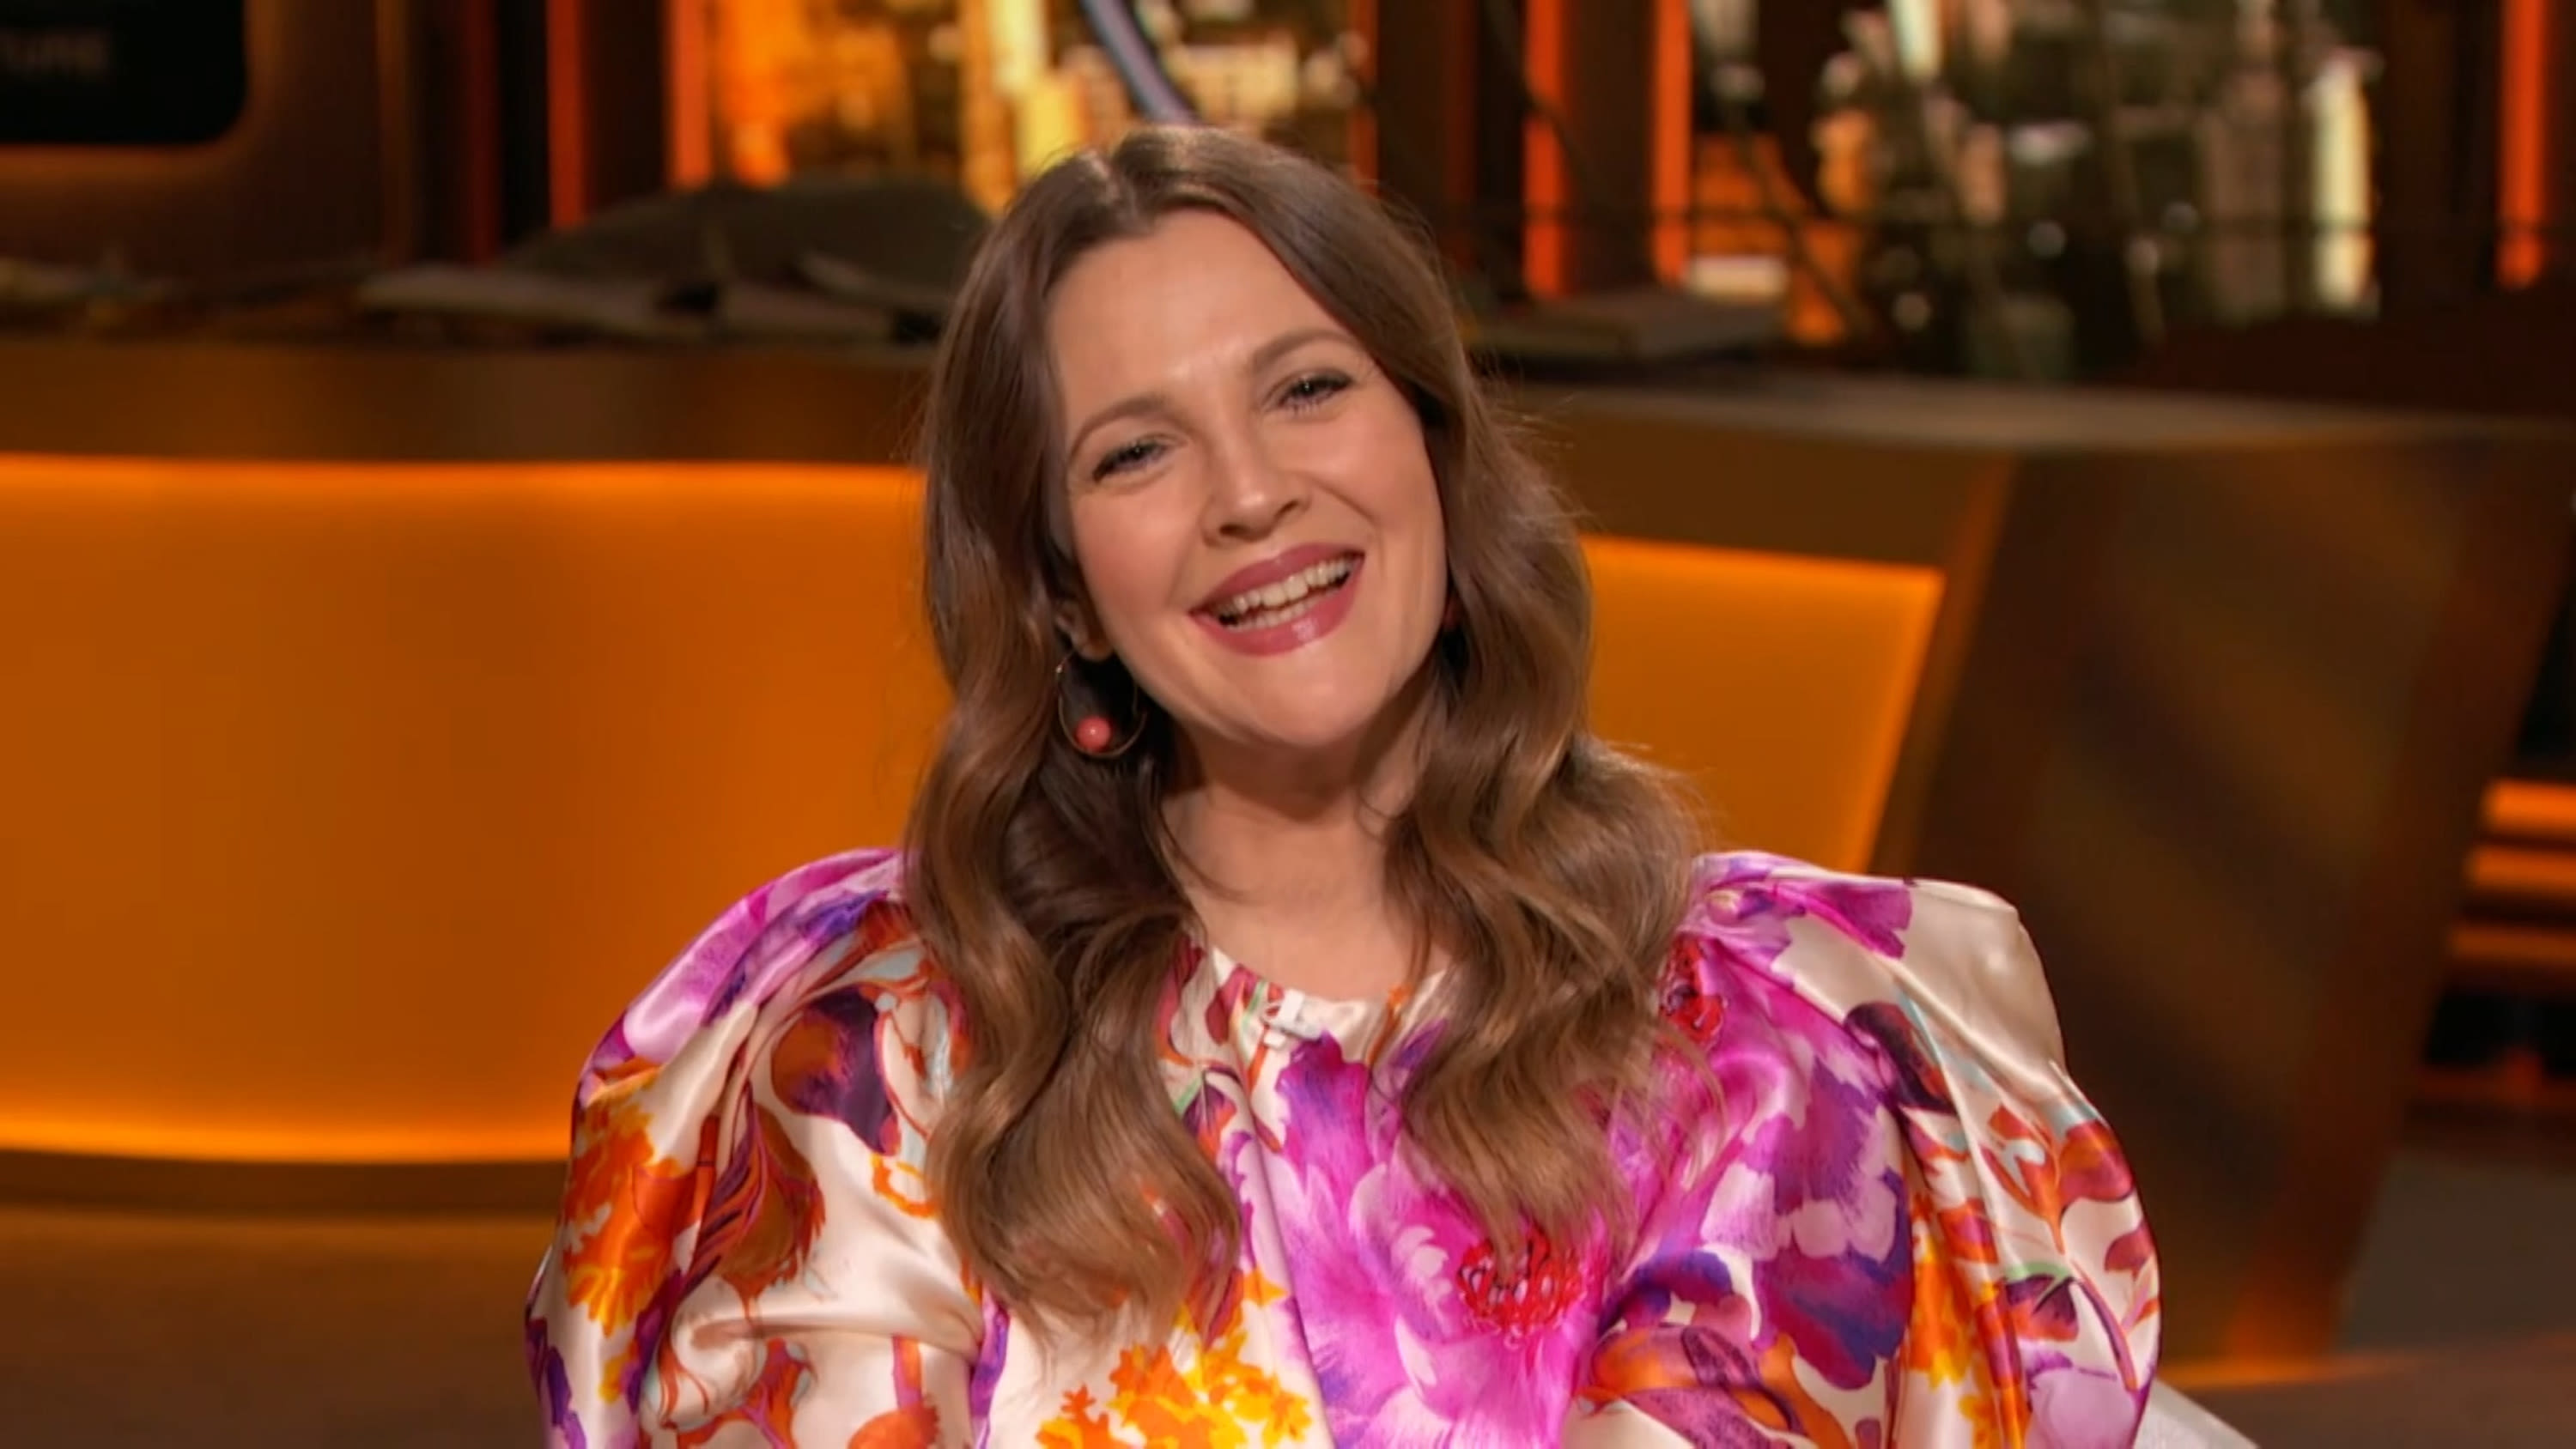 Drew Barrymore says this cleanser is 'by far the best,' and it's only $12 on Amazon